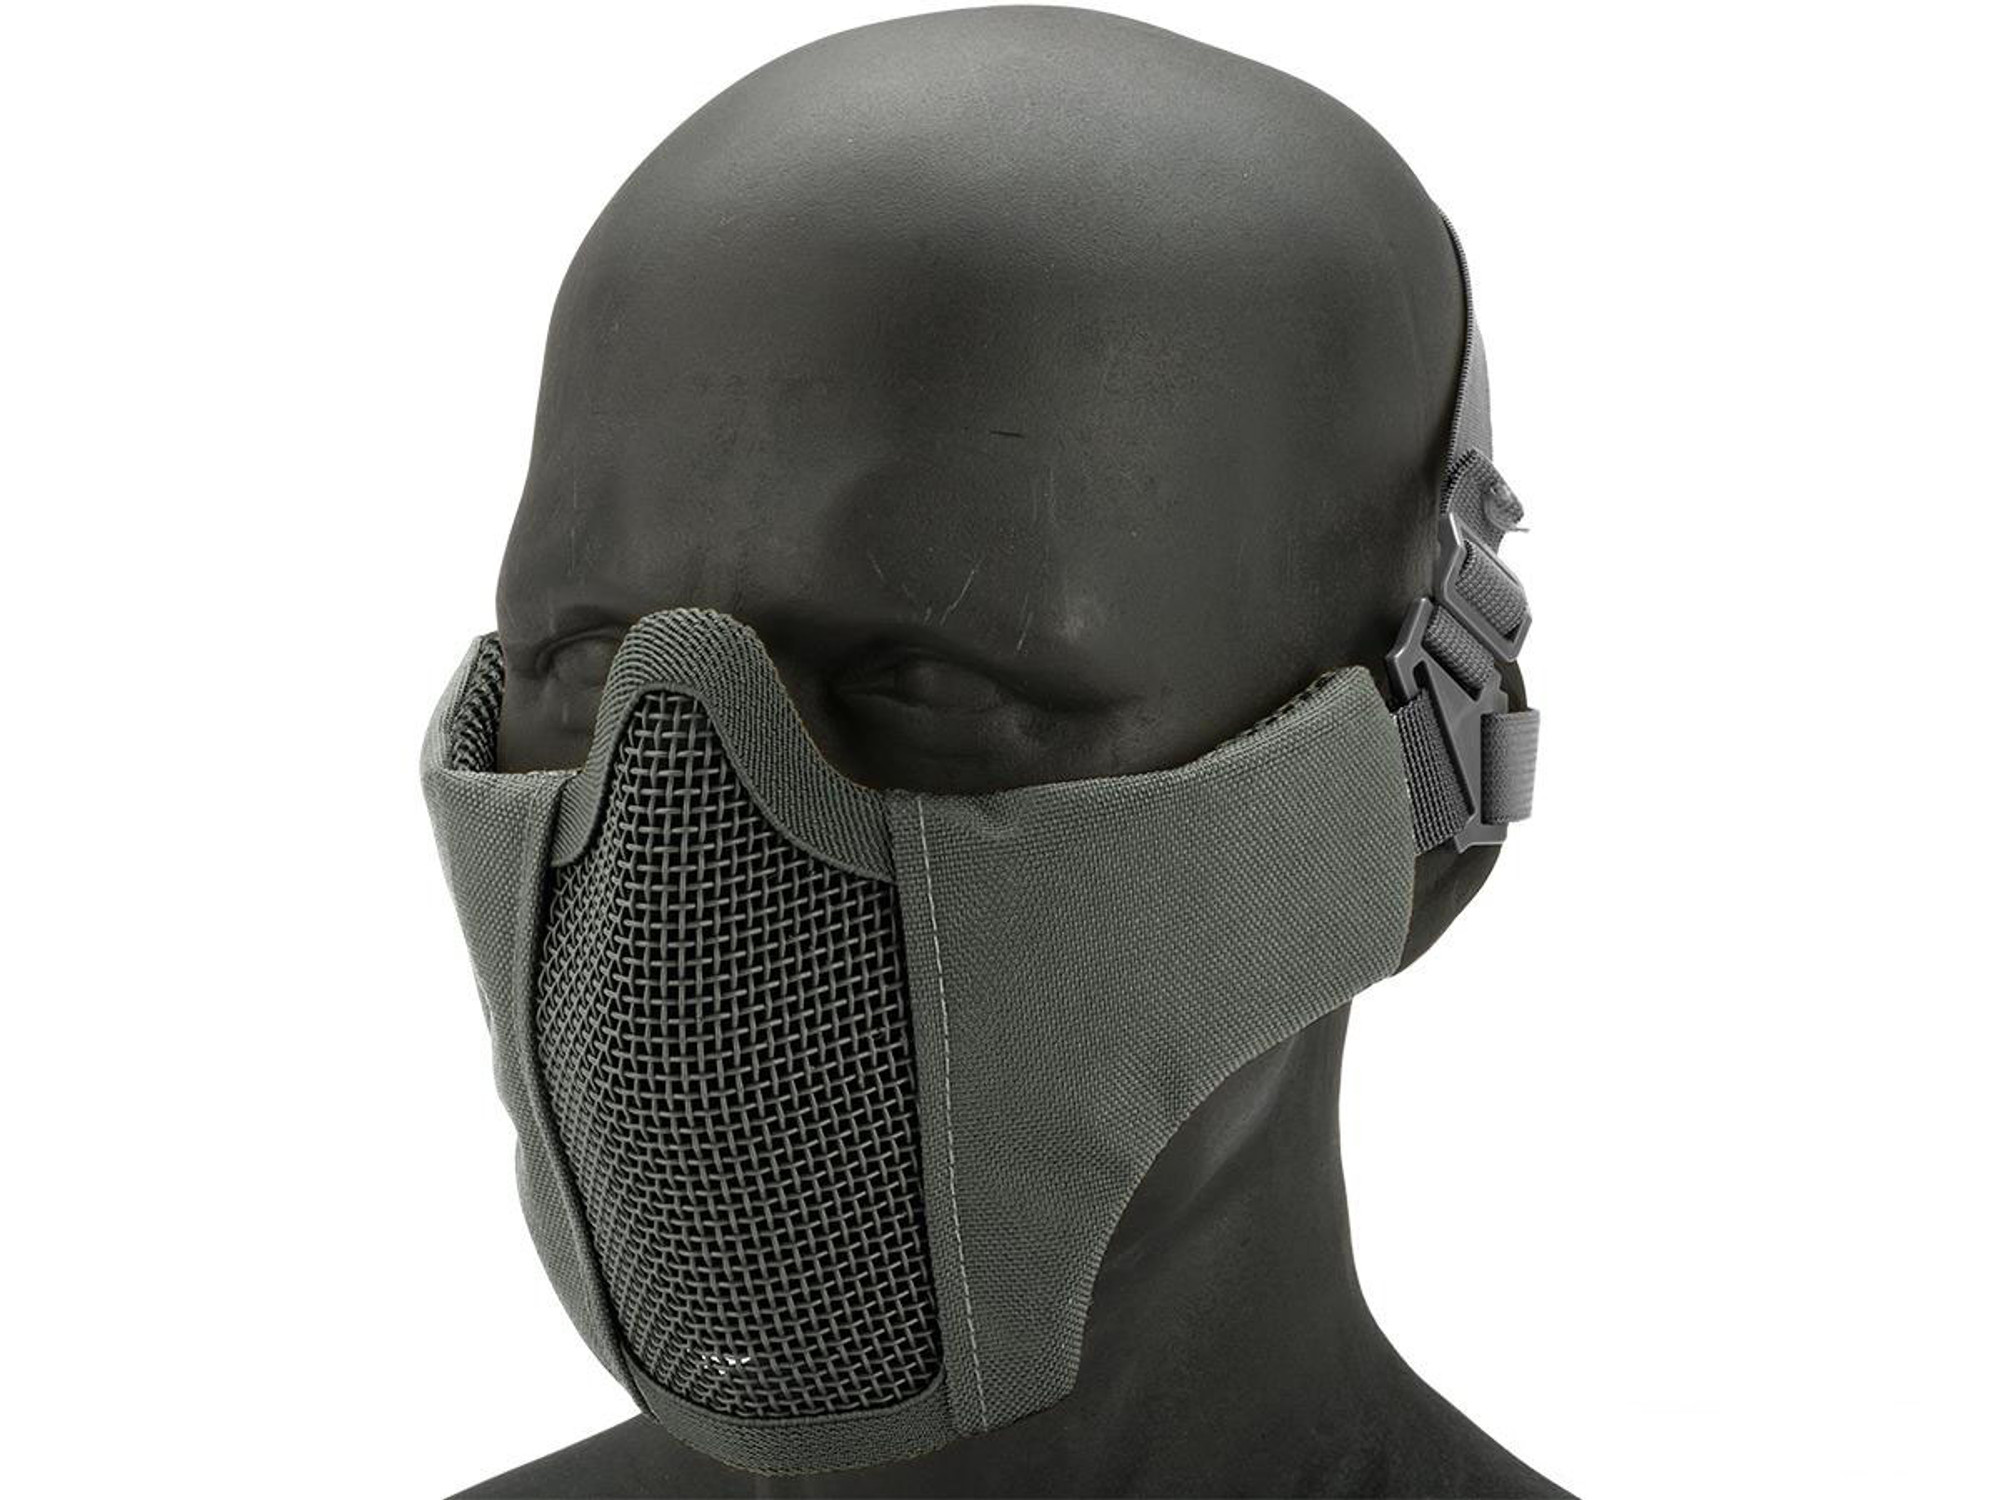 Matrix Low Profile Iron Face Padded Lower Half Face Mask (Color: Grey)